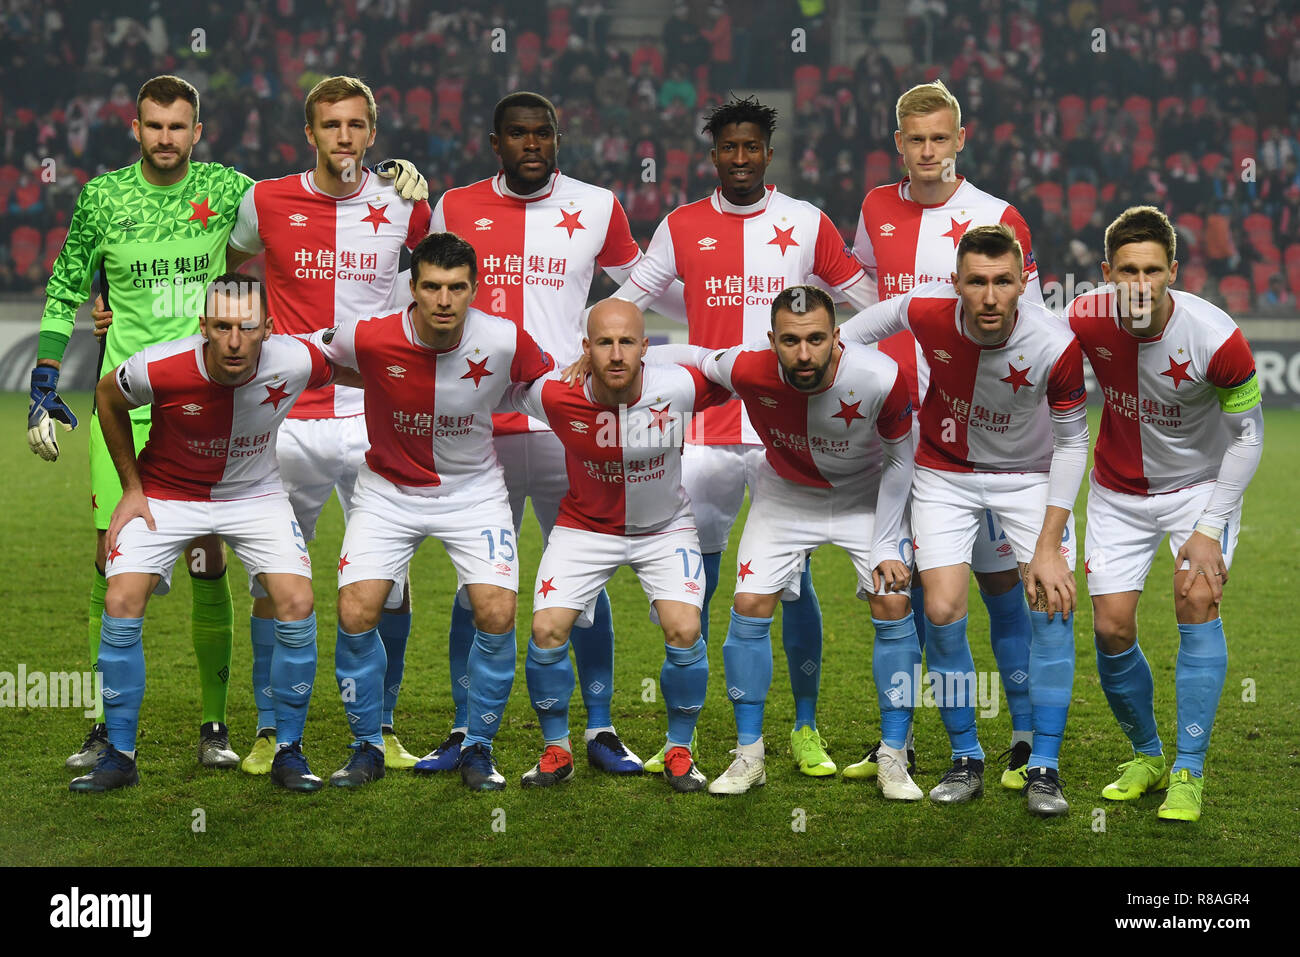 Prague, Czech Republic. 13th Dec, 2018. SK Slavia Praha soccer players pose  for photographers prior to the UEFA Europa League, Group Stage, Group C,  match between SK Slavia Praha and FC Zenit